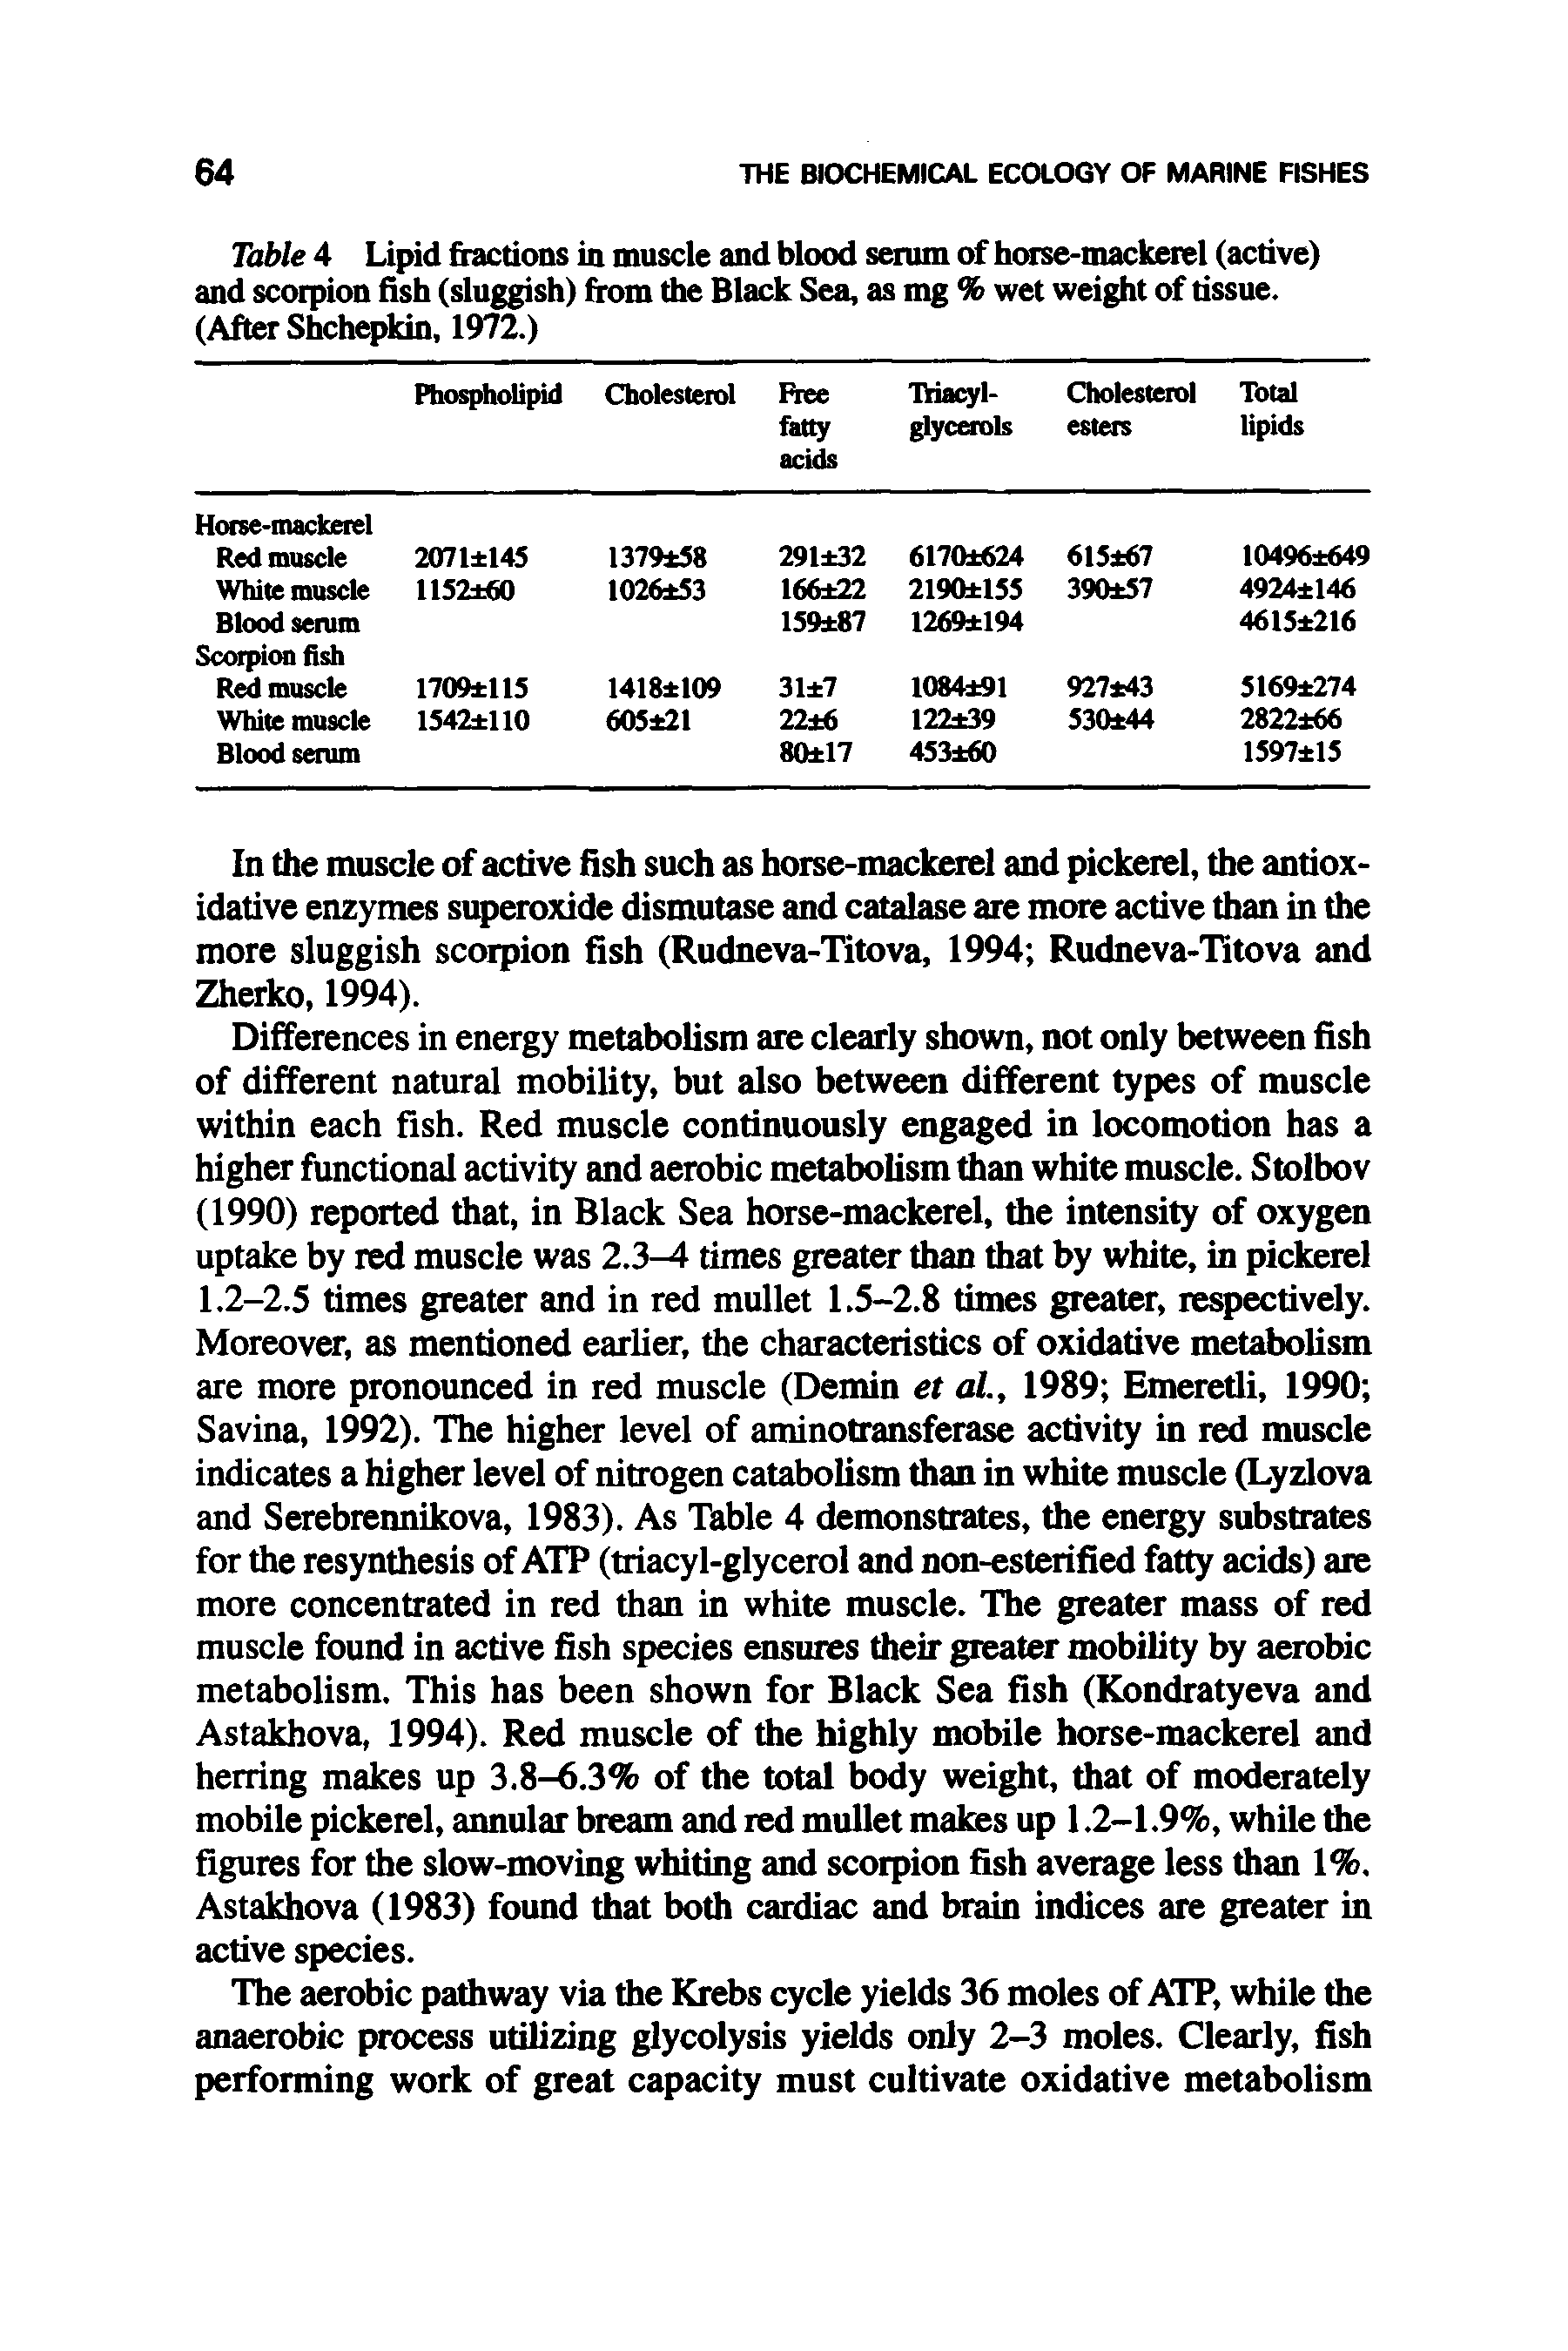 Table 4 Lipid fractions in muscle and blood serum of horse-mackerel (active) and scorpion fish (sluggish) from the Black Sea, as mg % wet weight of tissue. (After Shchepkin, 1972.)...